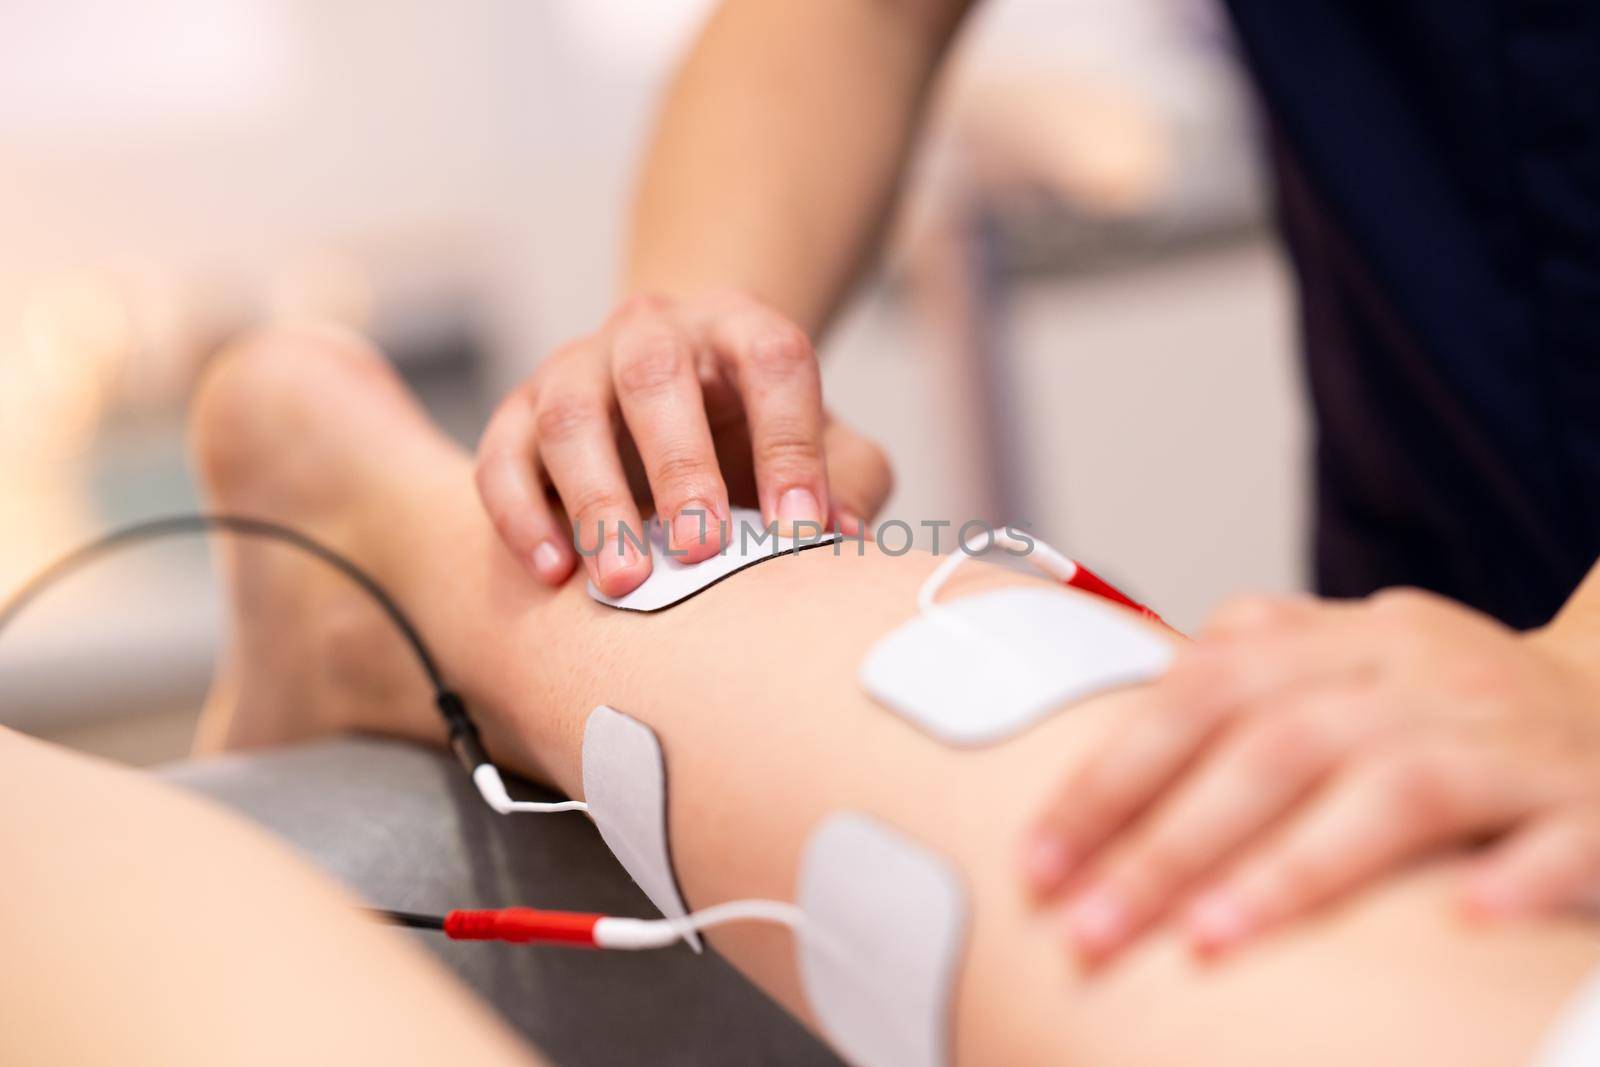 Electro stimulation in physical therapy to a young woman by javiindy